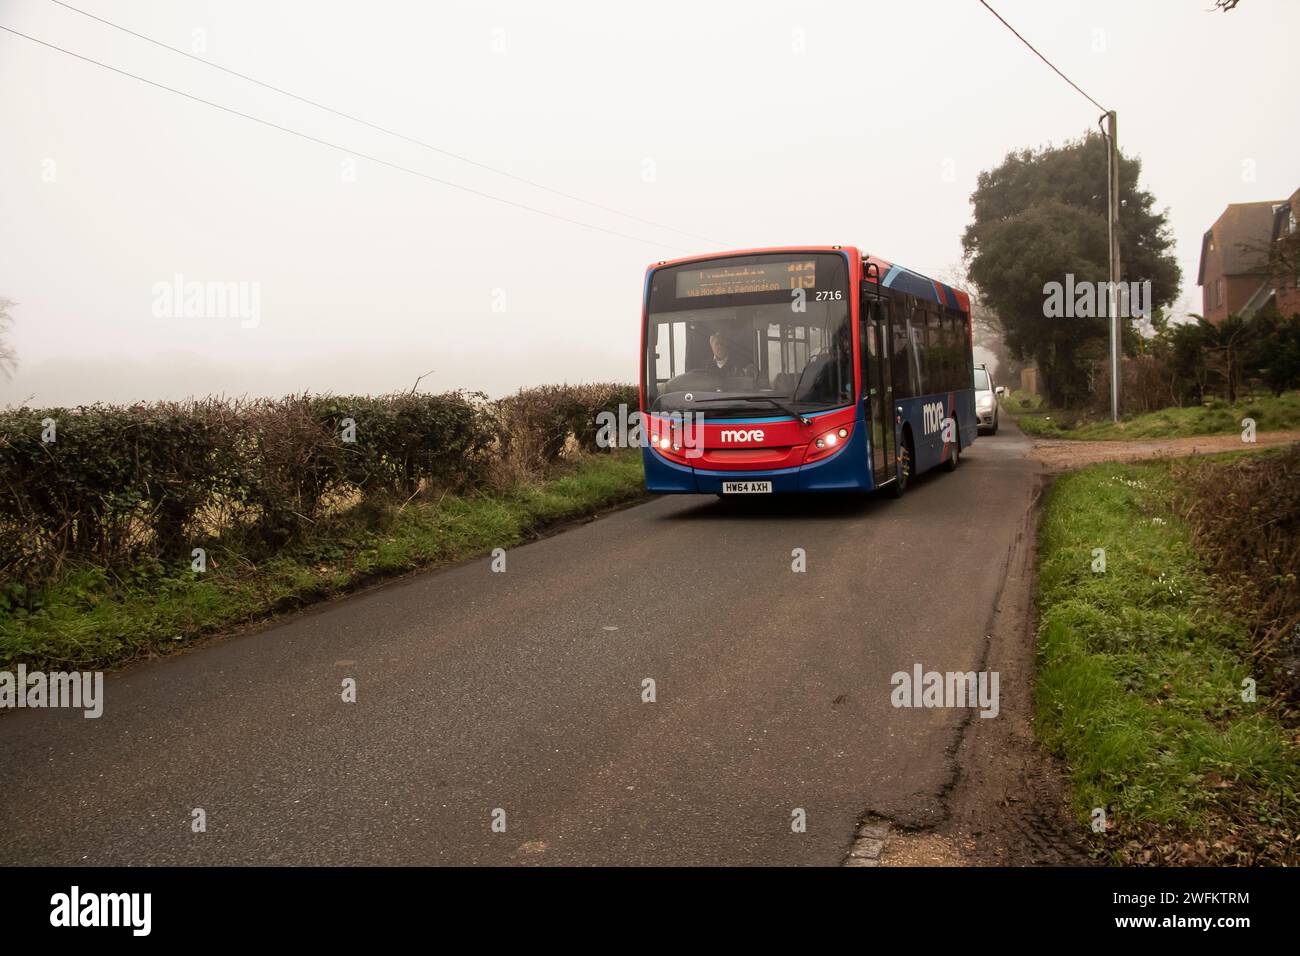 Morebus services New Forest Hampshire England. The first two are of service 119 diverted, and the other 3 of service 120, also in a quiet rural lane Stock Photo